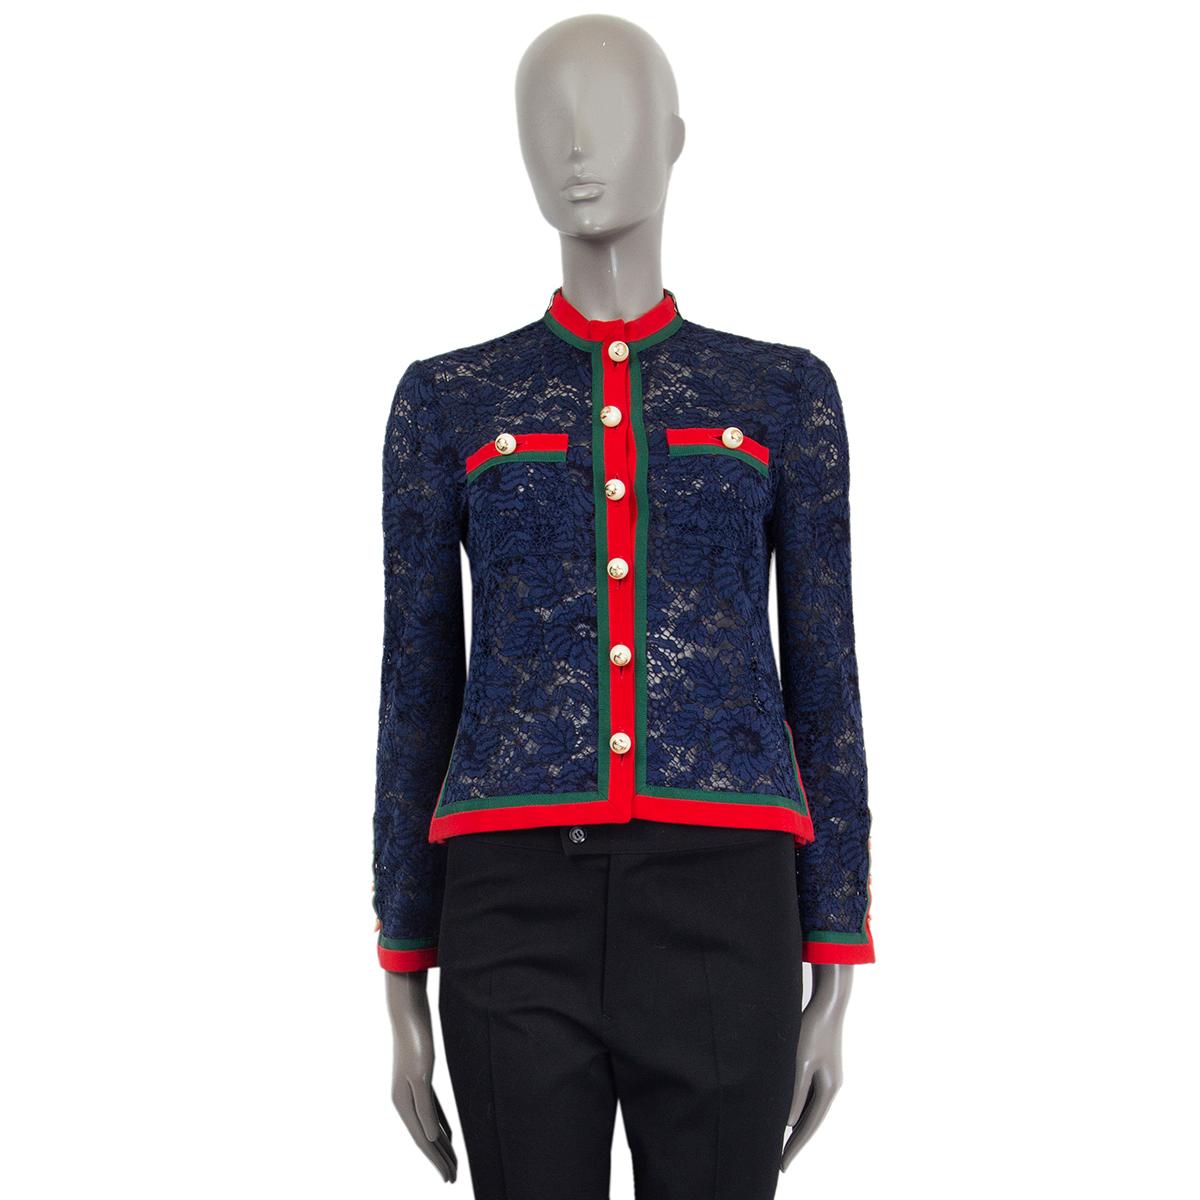 Gucci longsleeve floral navy blue lace (missing tag/cotton blend) jacket designed with a rounded split neck and chest patch pockets featuring accented with their signature red and green webbing and GG faux pearl buttons. Boxy fit. Unlined. Has been